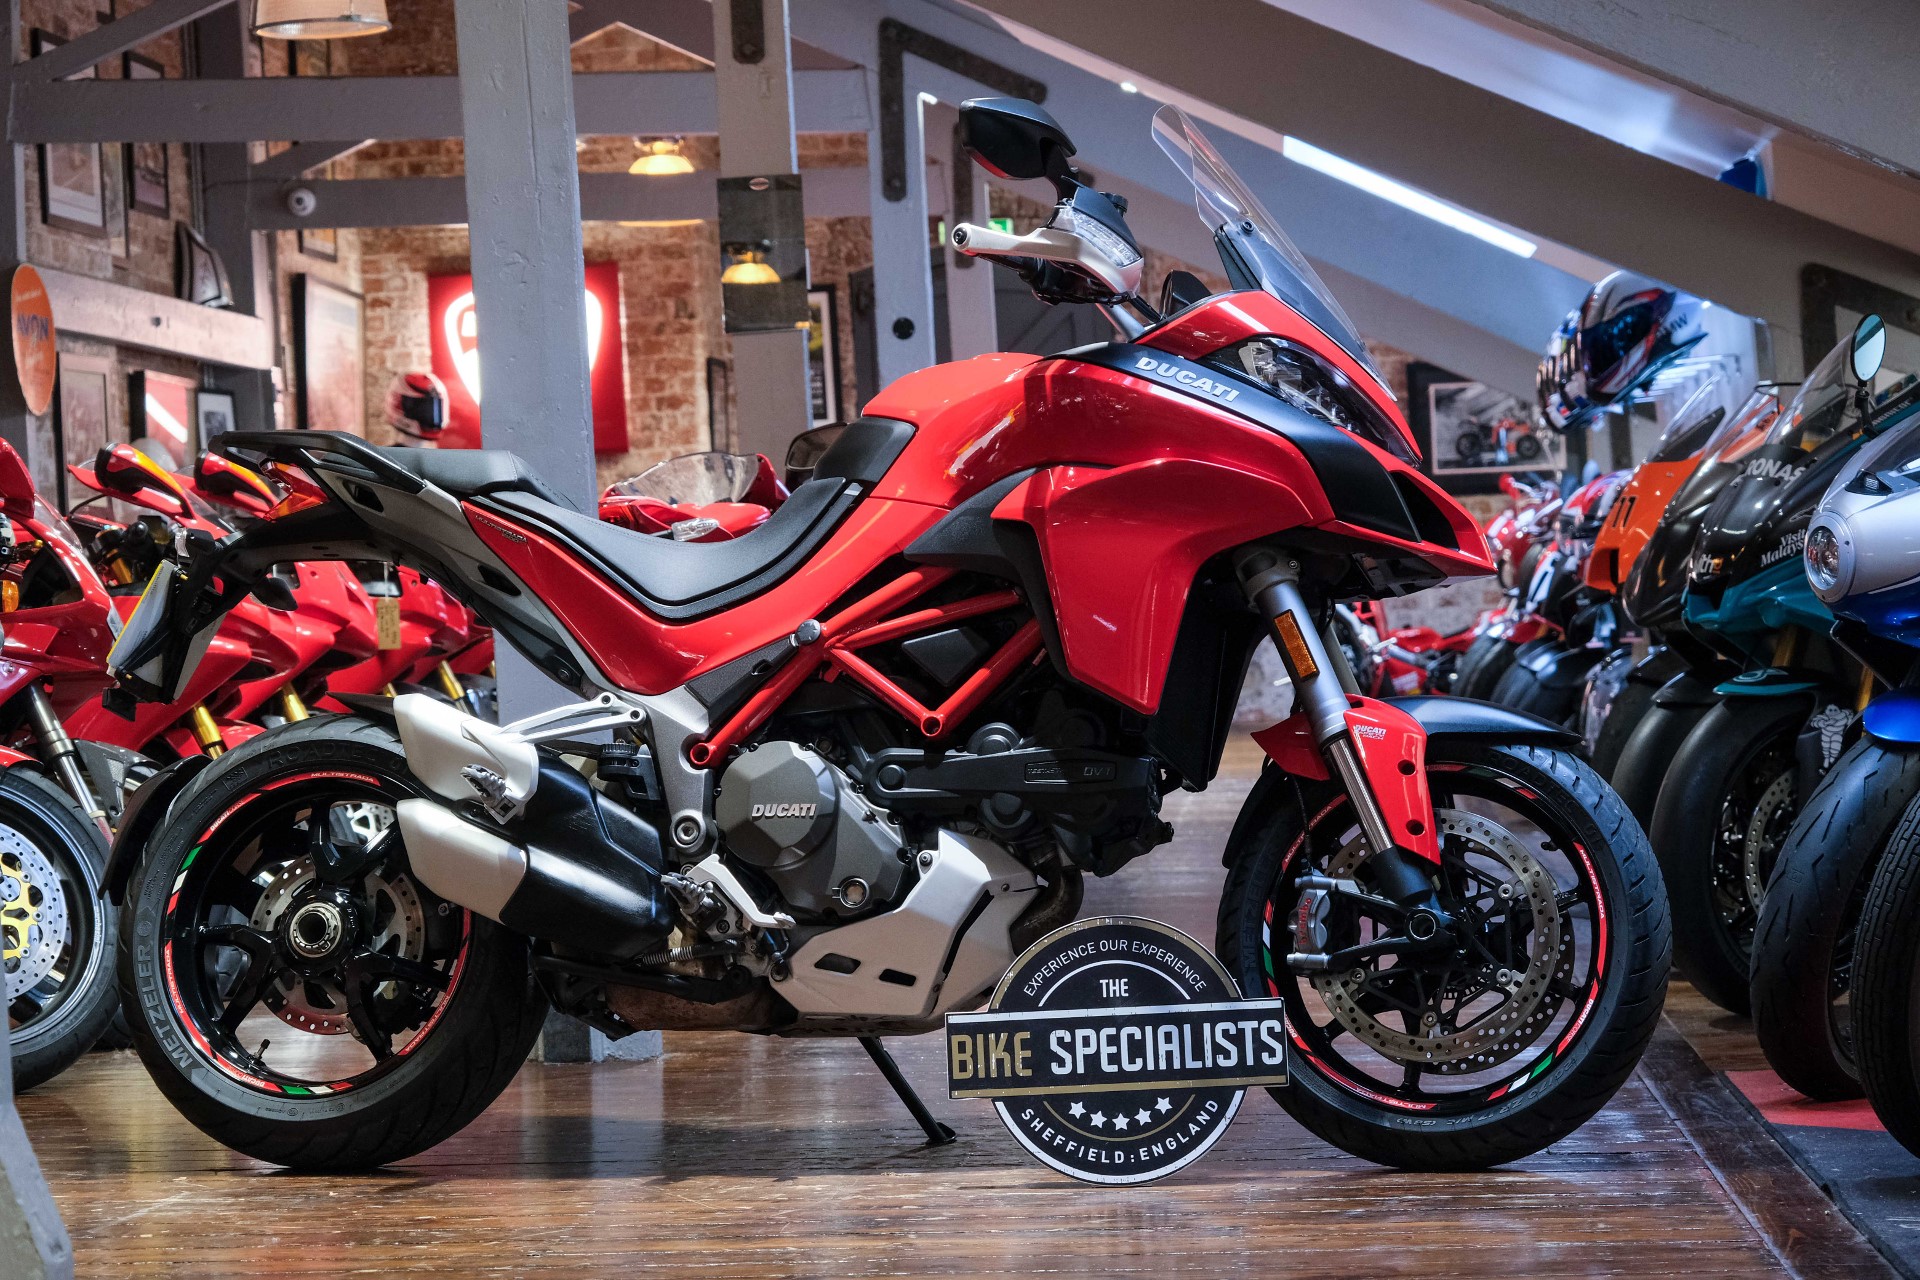 Ducati Multistrada 1200 | The Bike Specialists | South Yorkshire